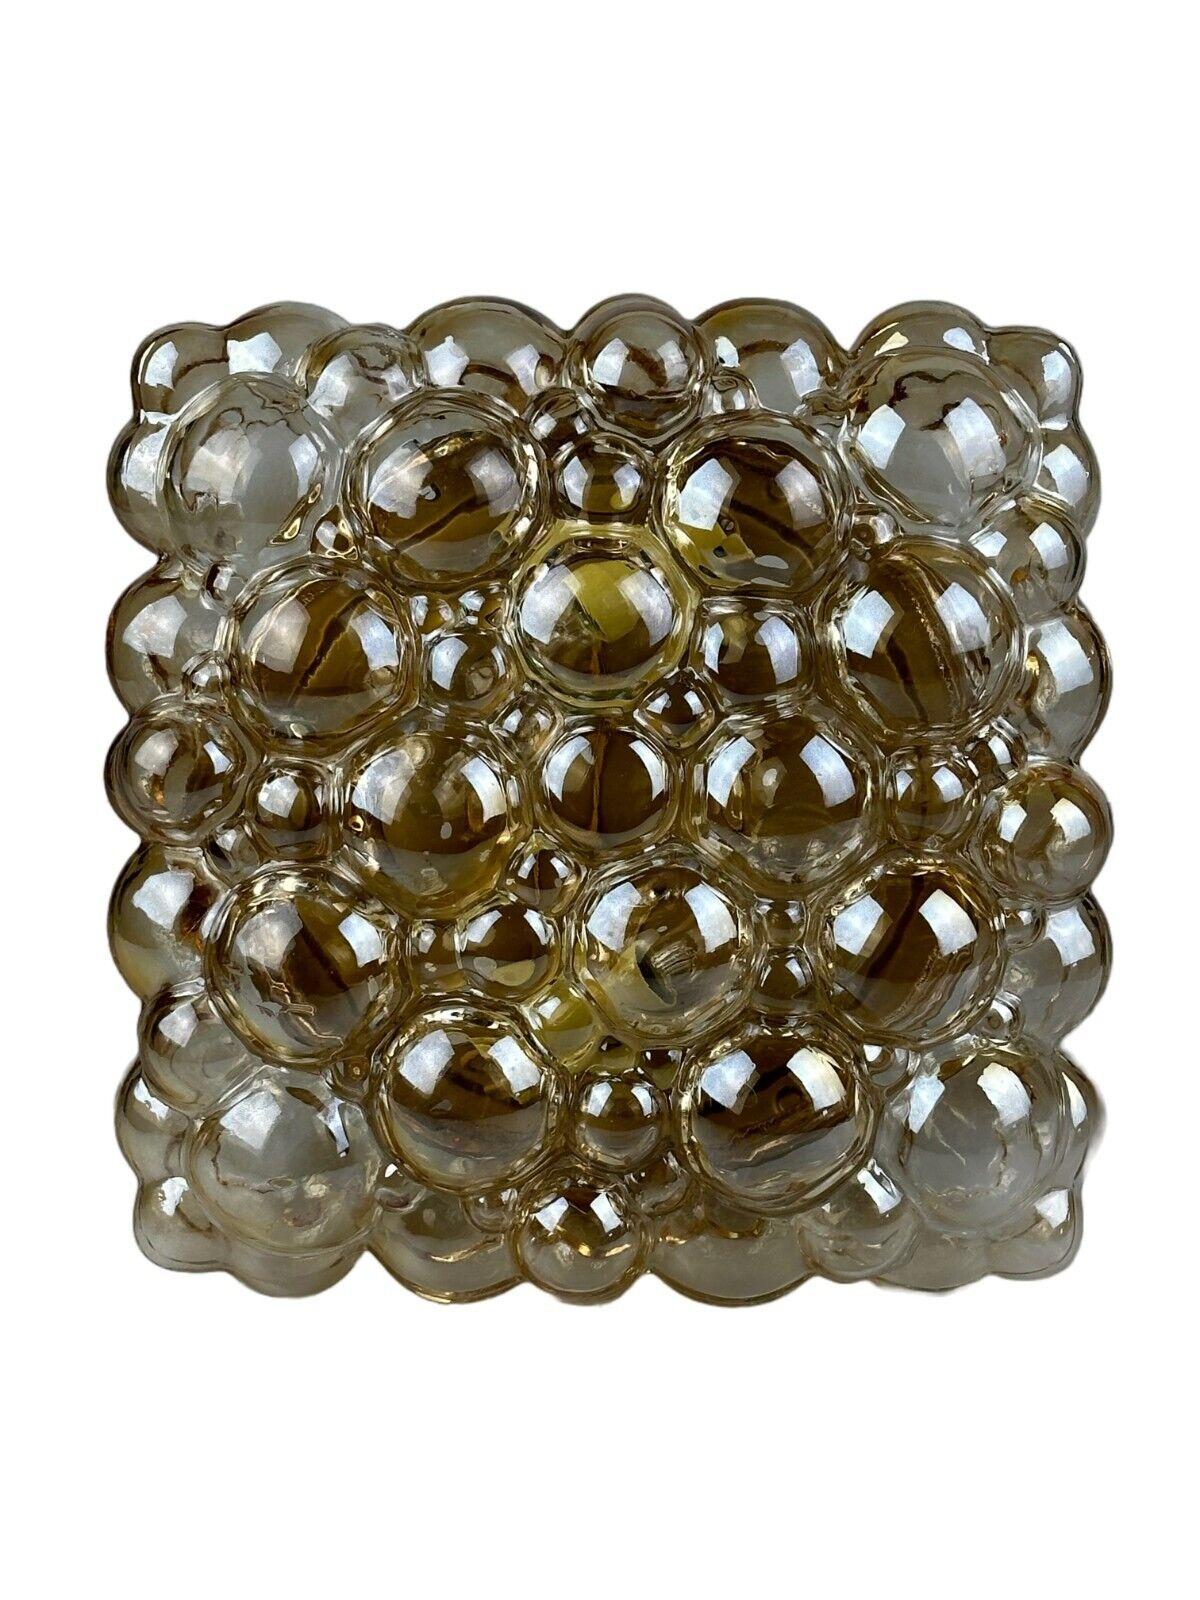 60s 70s ceiling lamp Glashütte Limburg Germany Helena Tynell Bubble

Object: wall lamp

Manufacturer: Glashütte Limburg

Condition: good

Age: around 1960-1970

Dimensions:

Width = 27.5cm
Depth = 27.5cm
Height = 12.5cm

Material: glass,